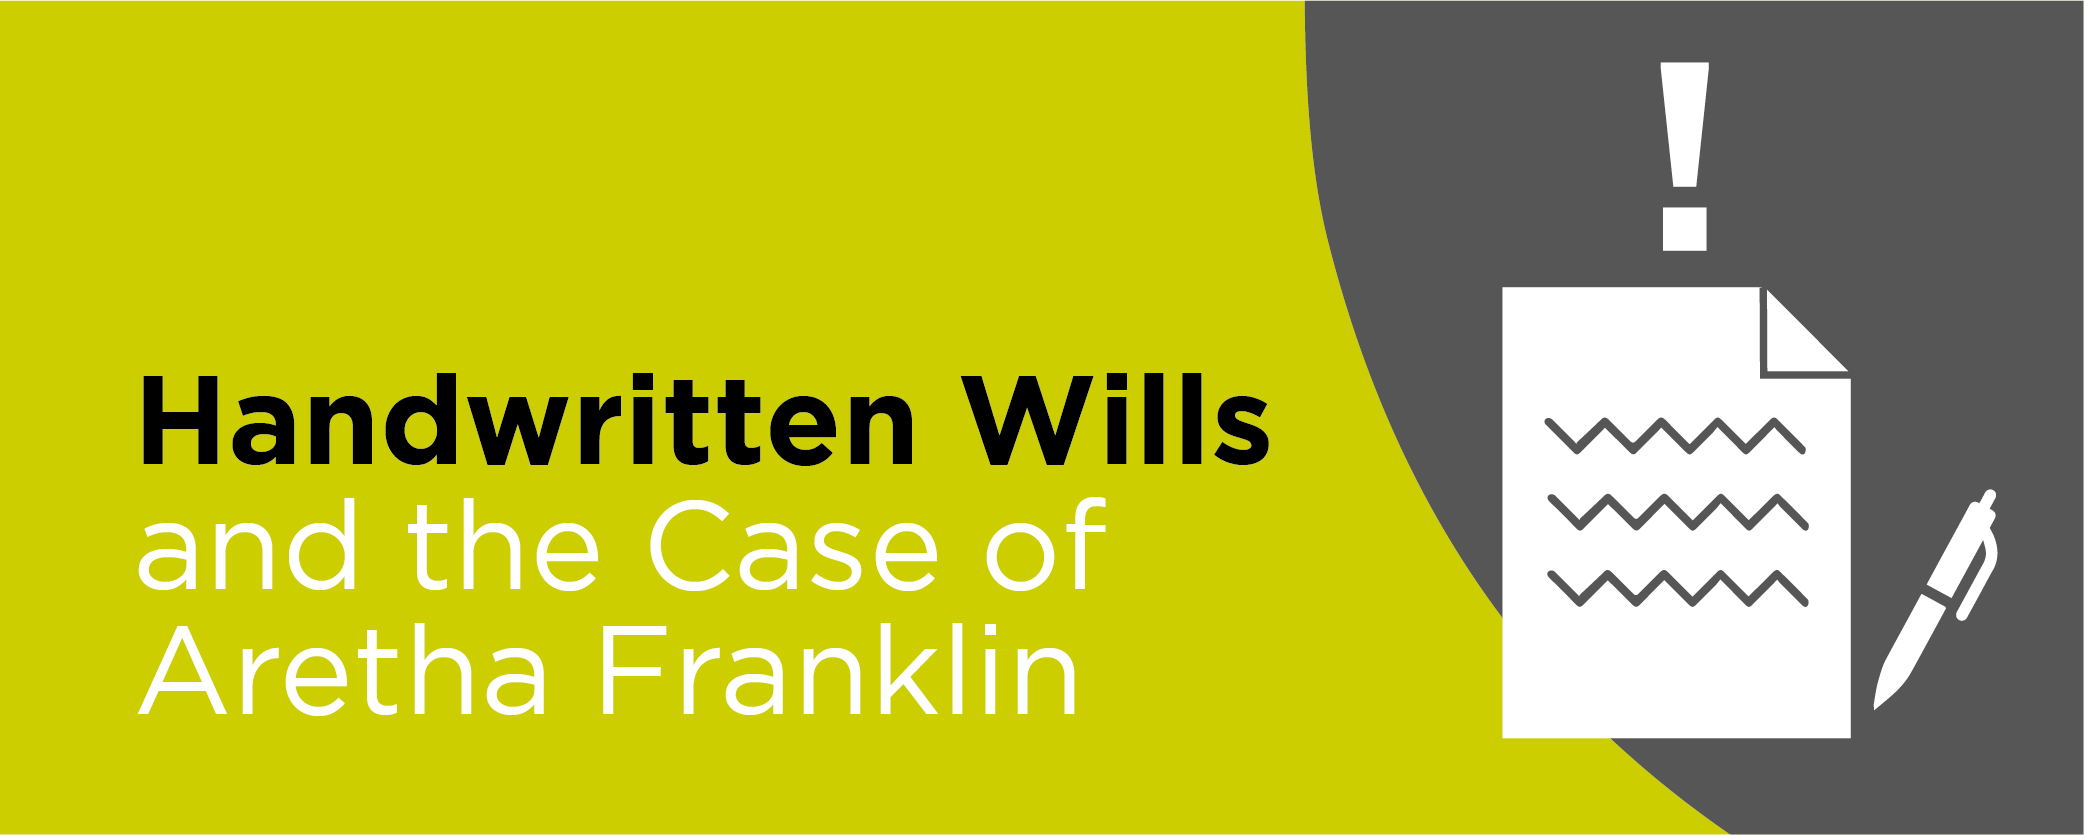 Handwritten Wills and the Case of Aretha Franklin